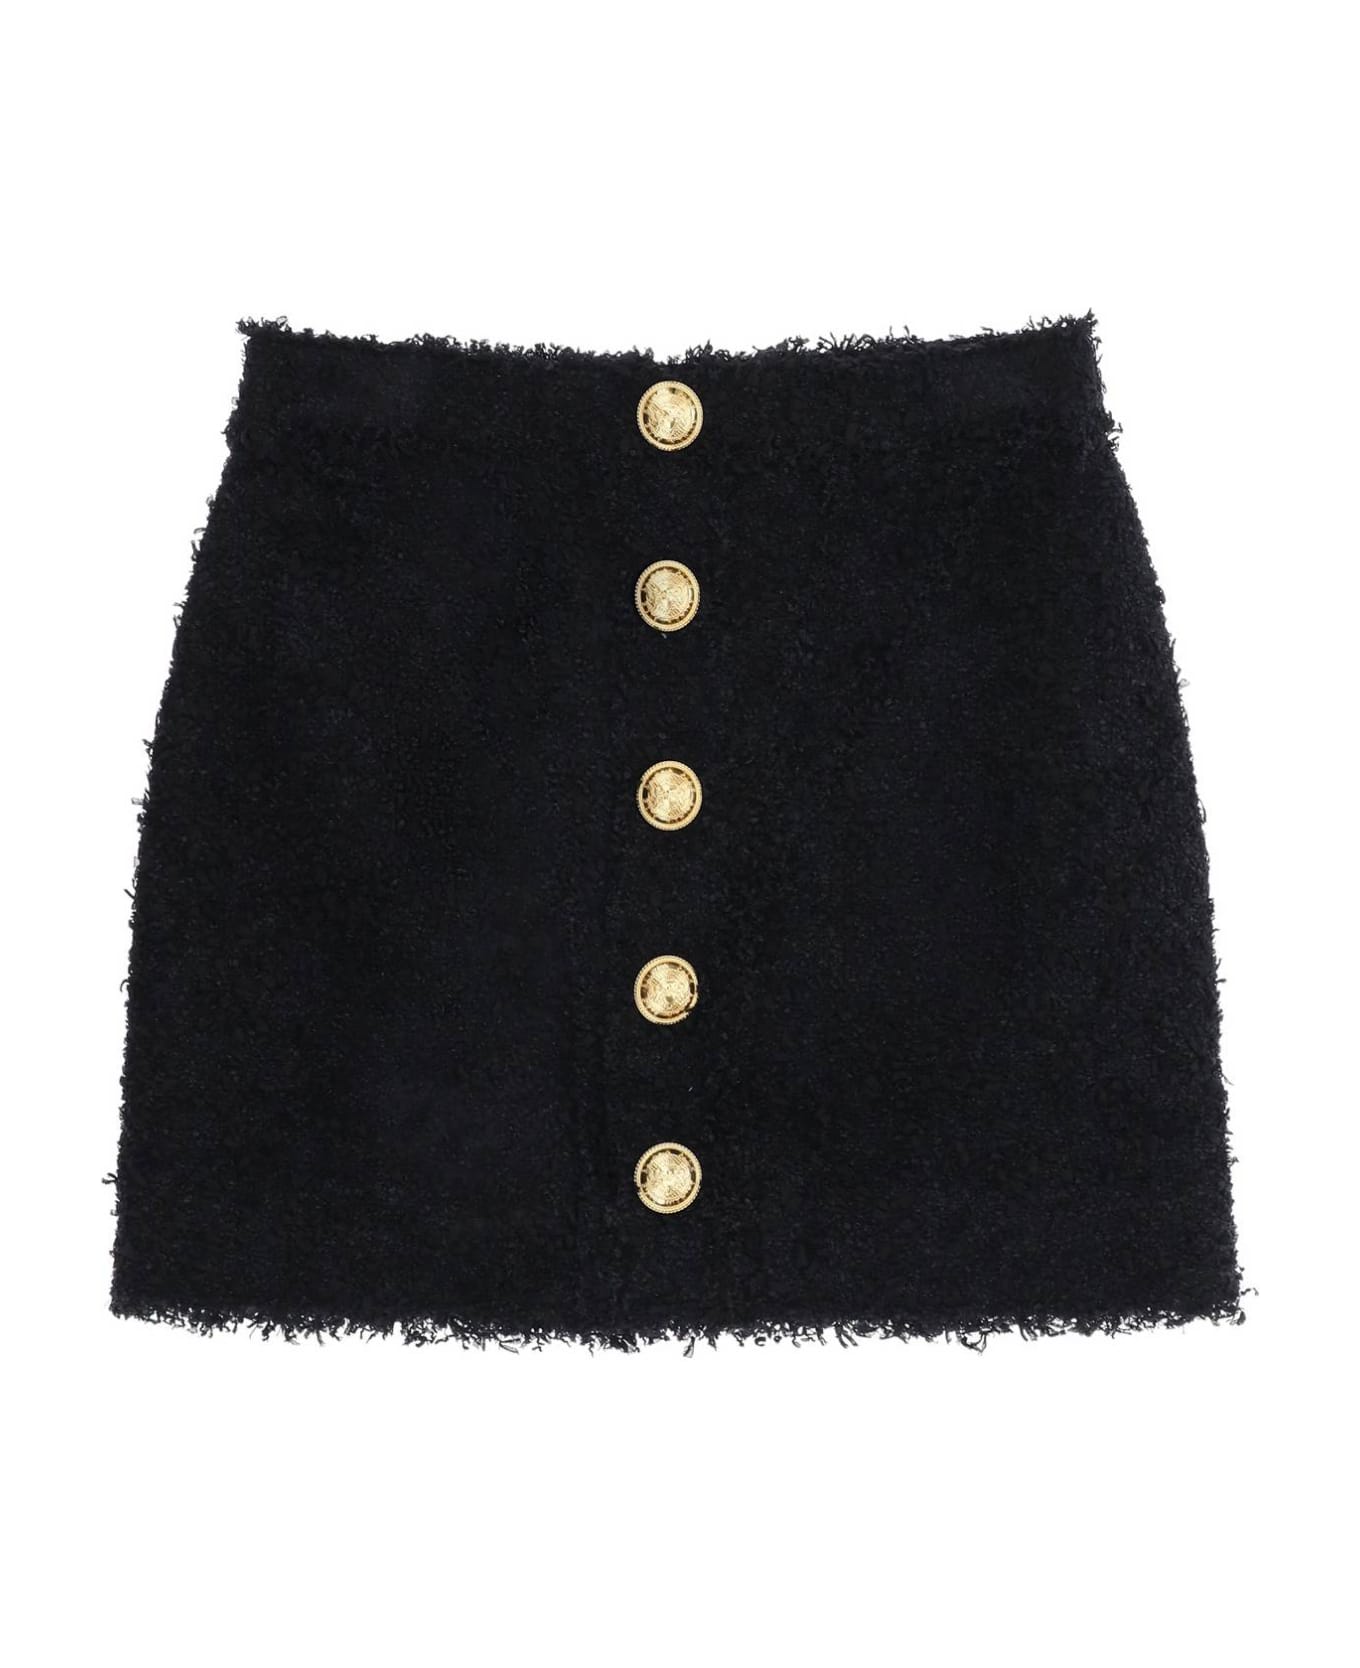 Balmain Tweed Skirt With Gold Buttons - Nero